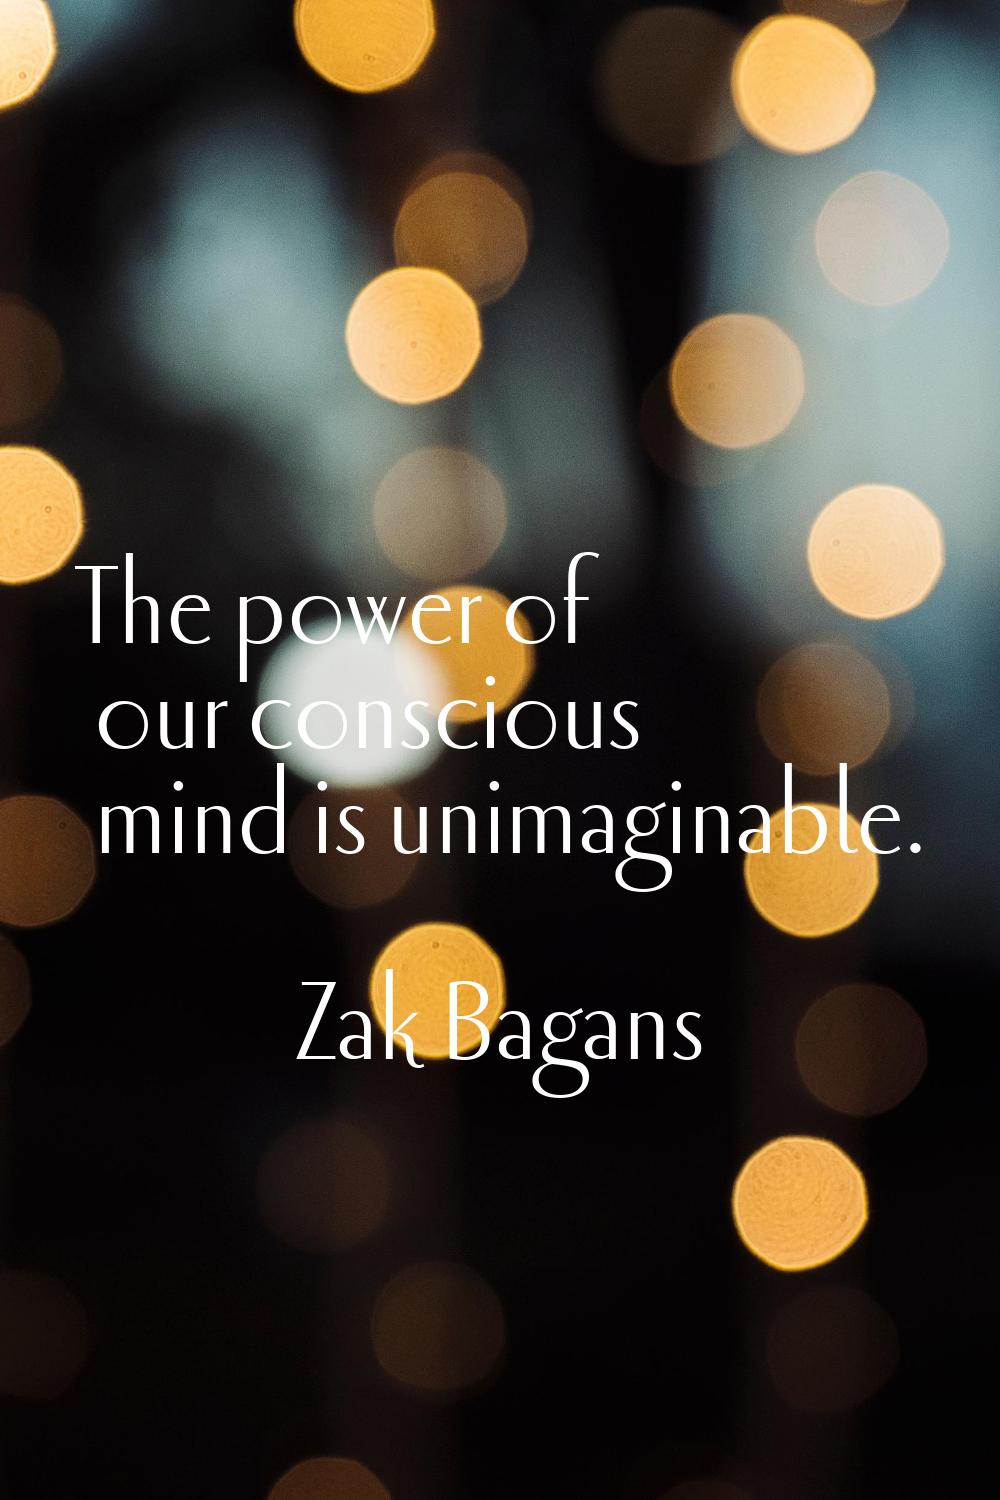 The power of our conscious mind is unimaginable.